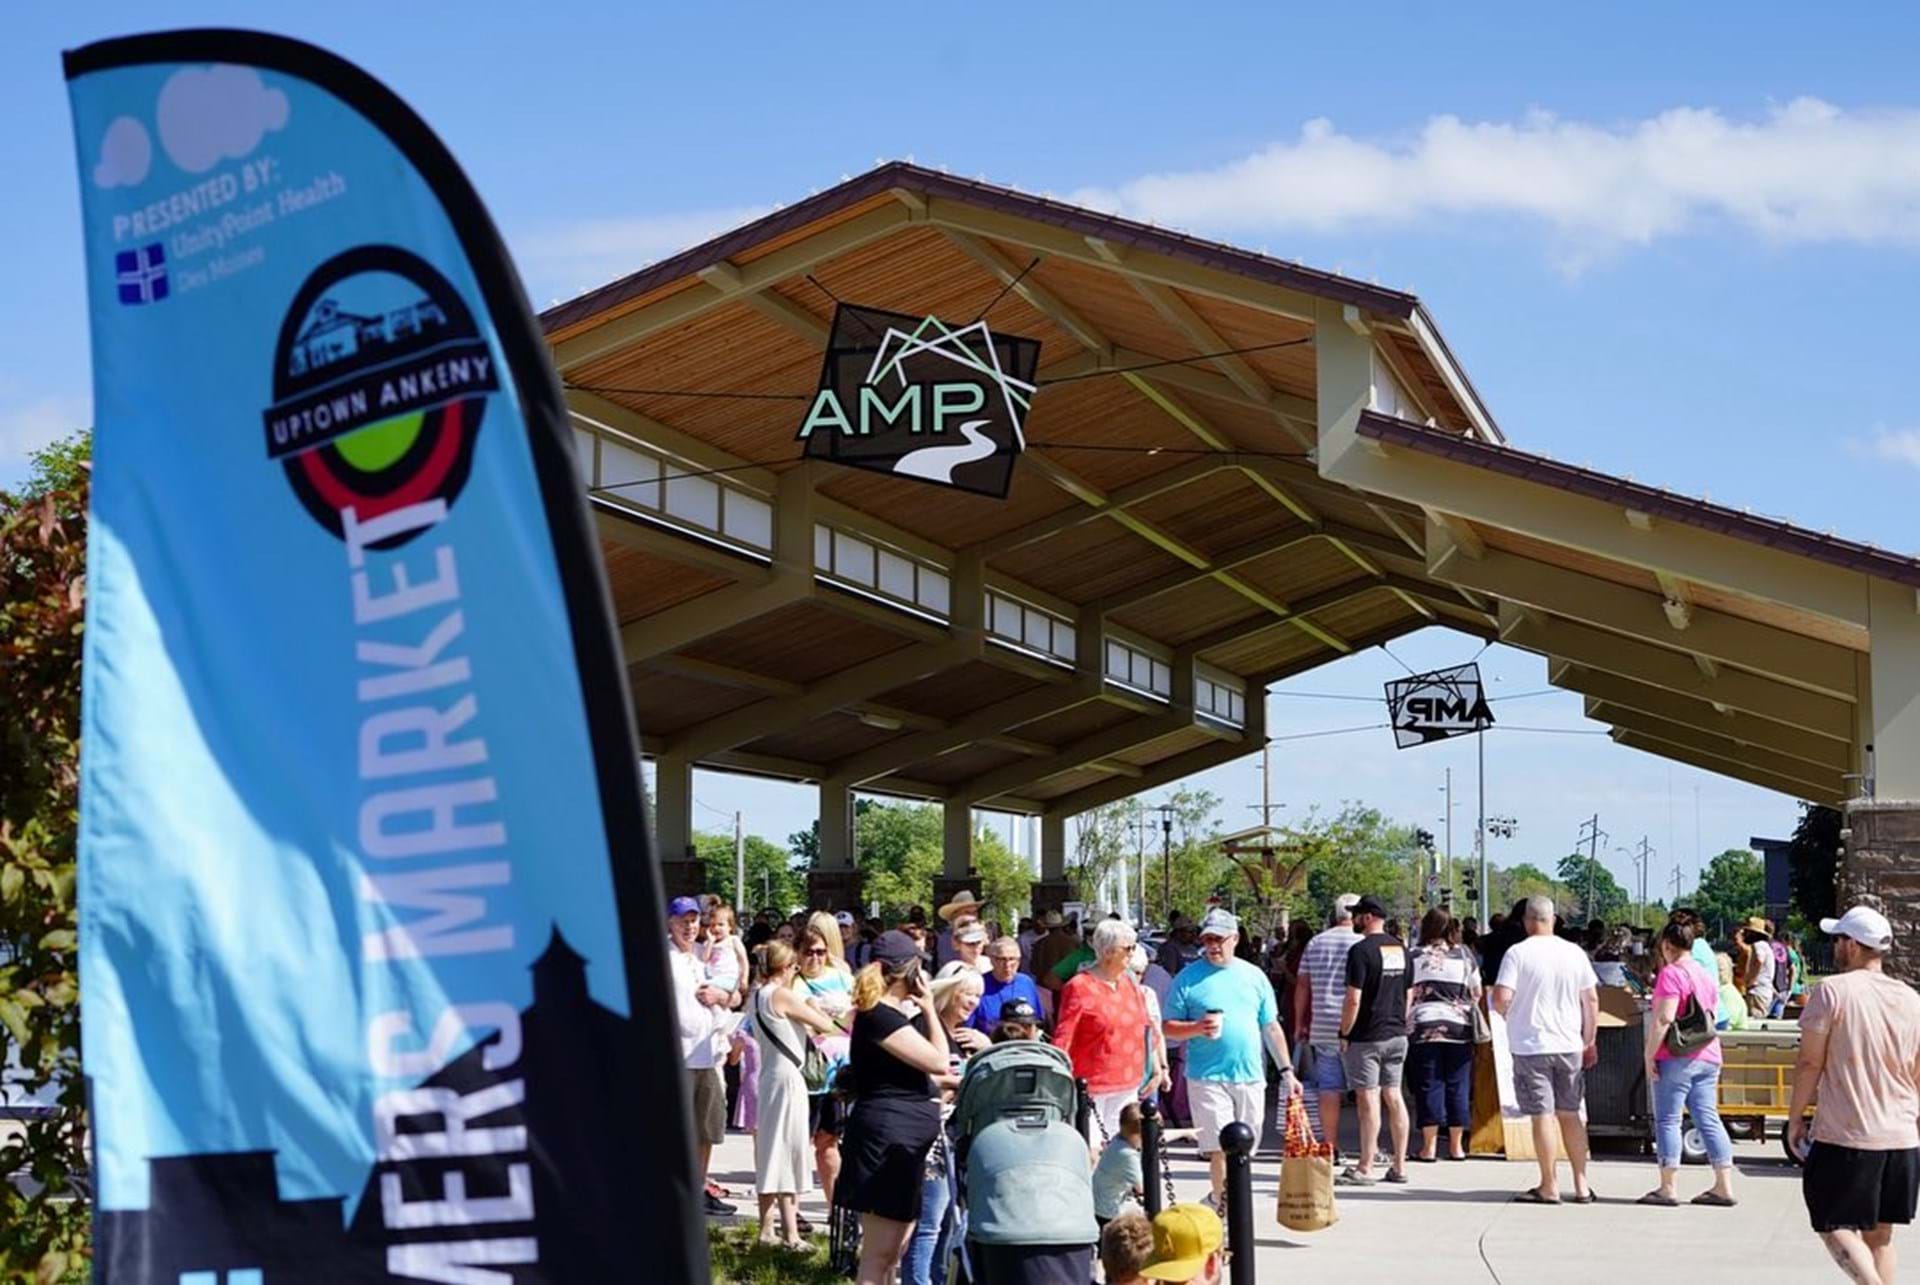 The Uptown Ankeny Farmers Market is located at the Ankeny Market & Pavilion facility.